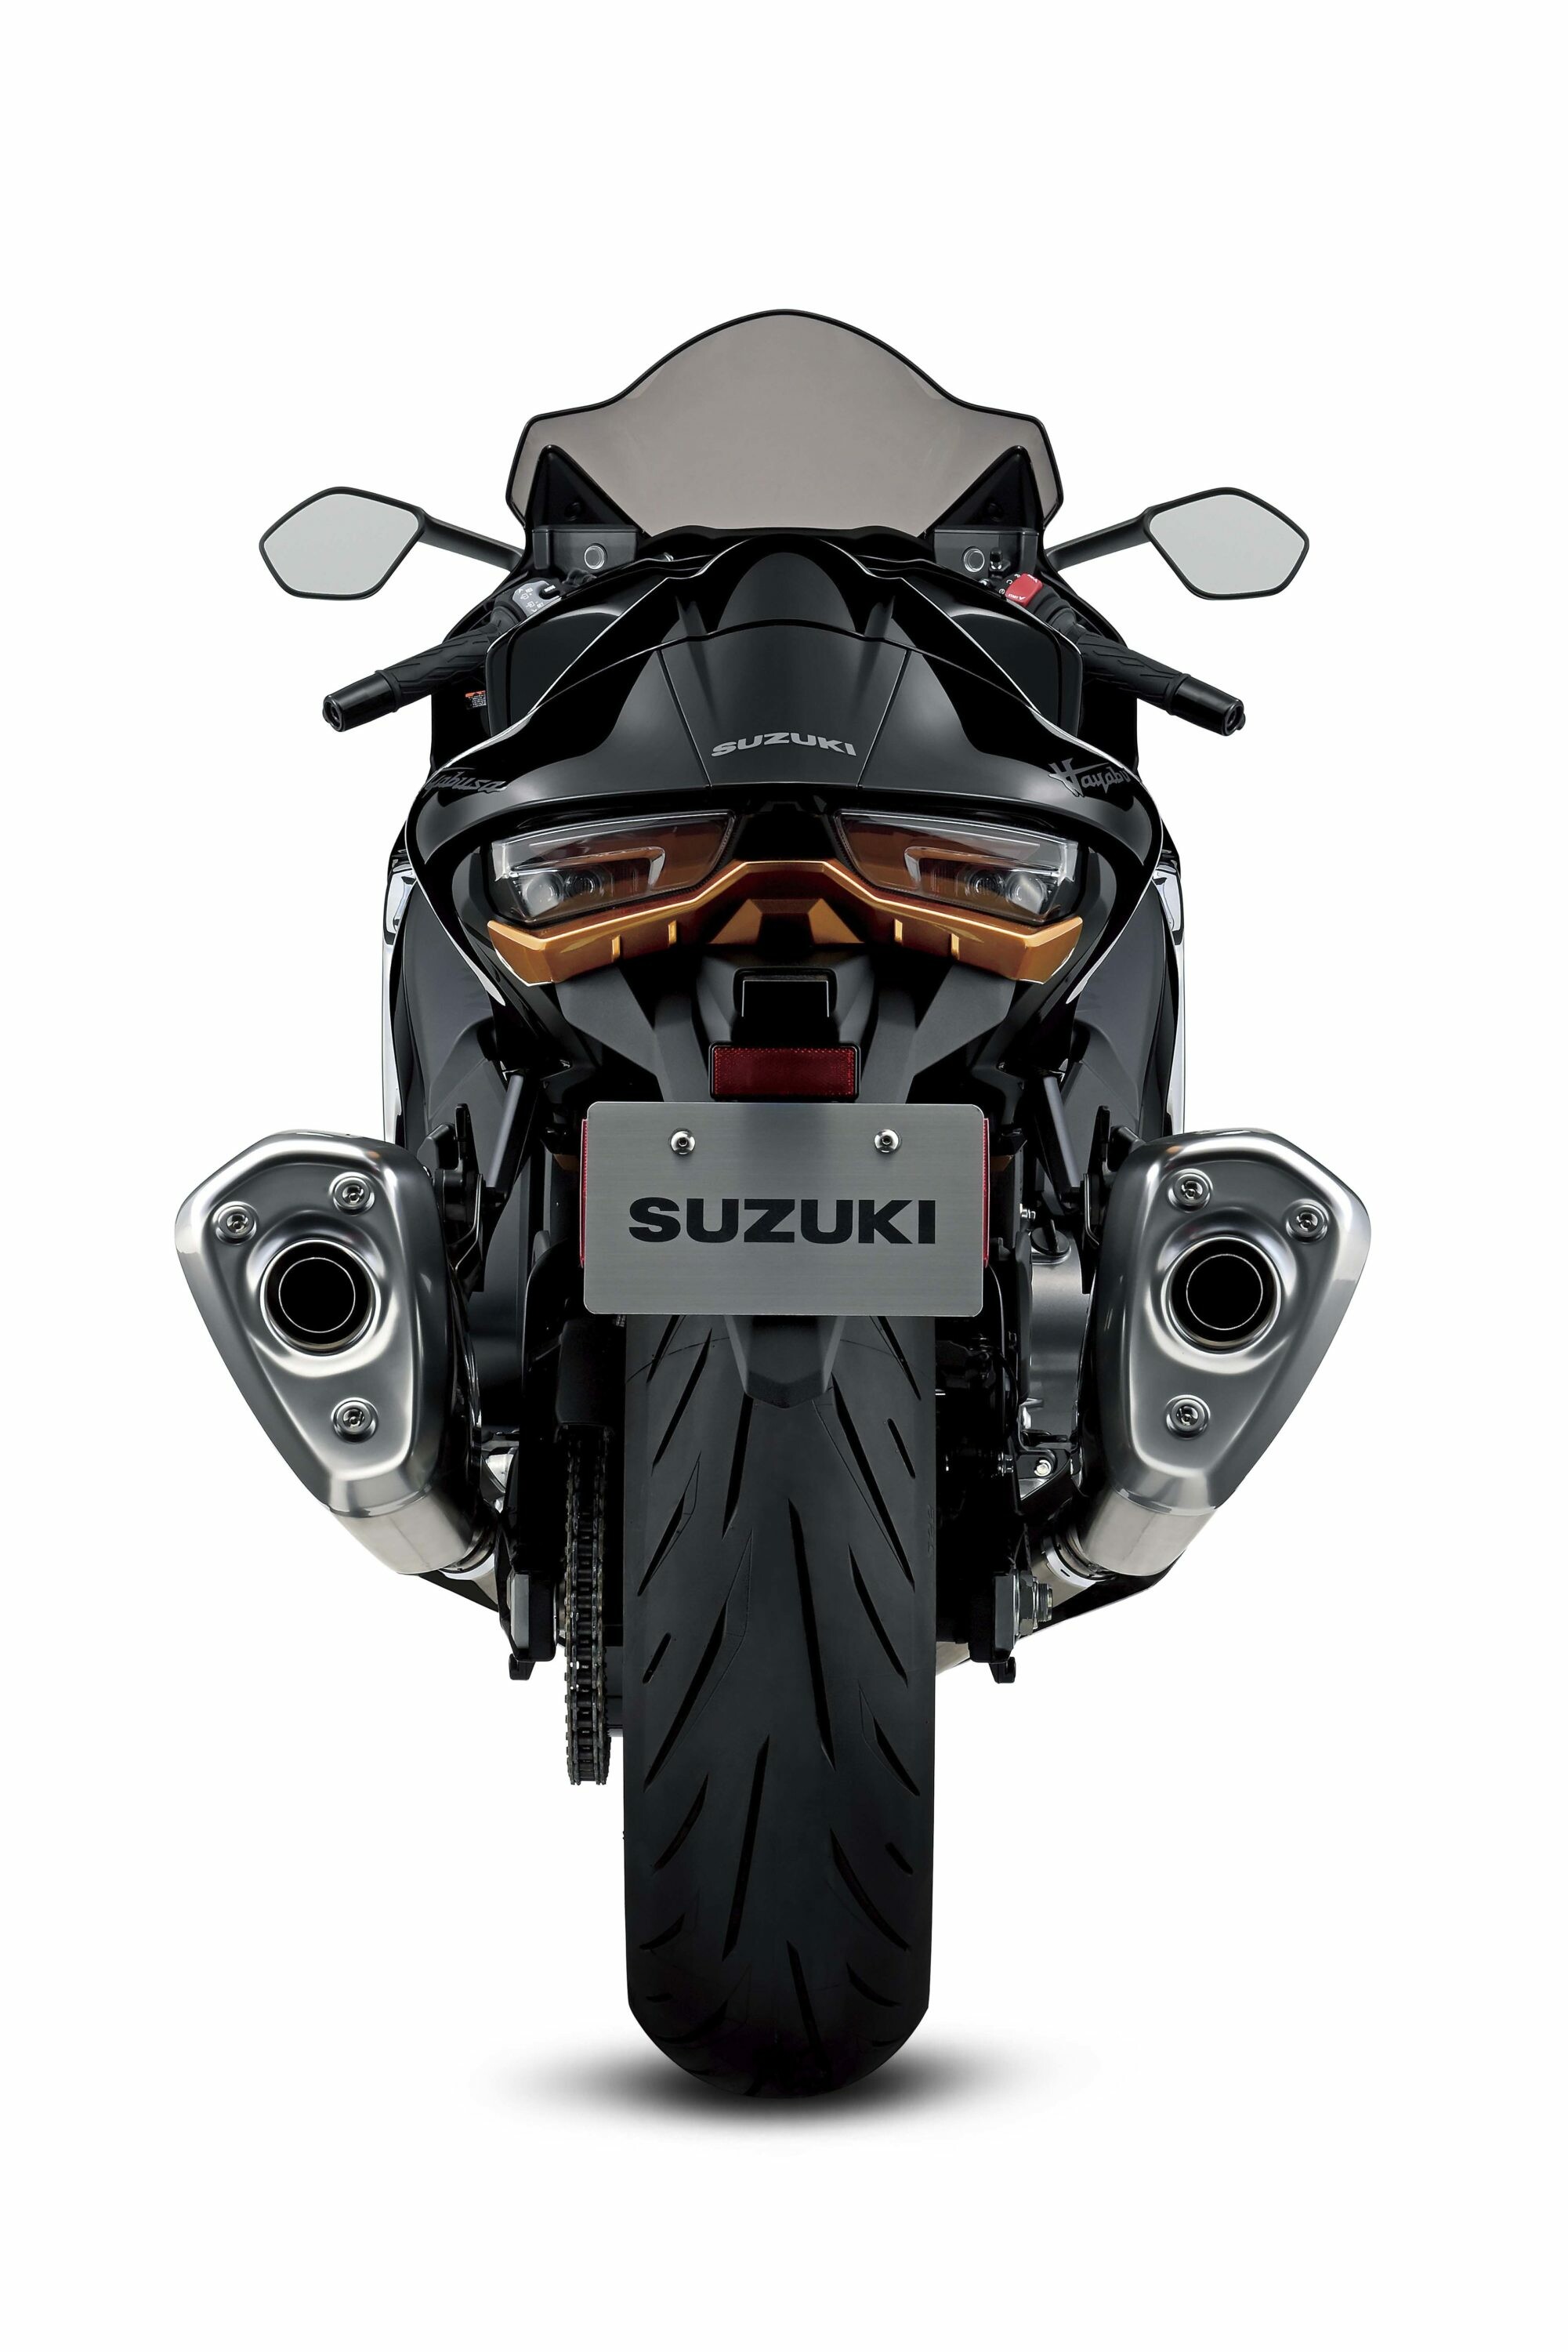 Suzuki Hayabusa: Named for Japan’s fastest bird, the Japanese peregrine falcon, Often called Busa by its fans. 2010x3010 HD Background.